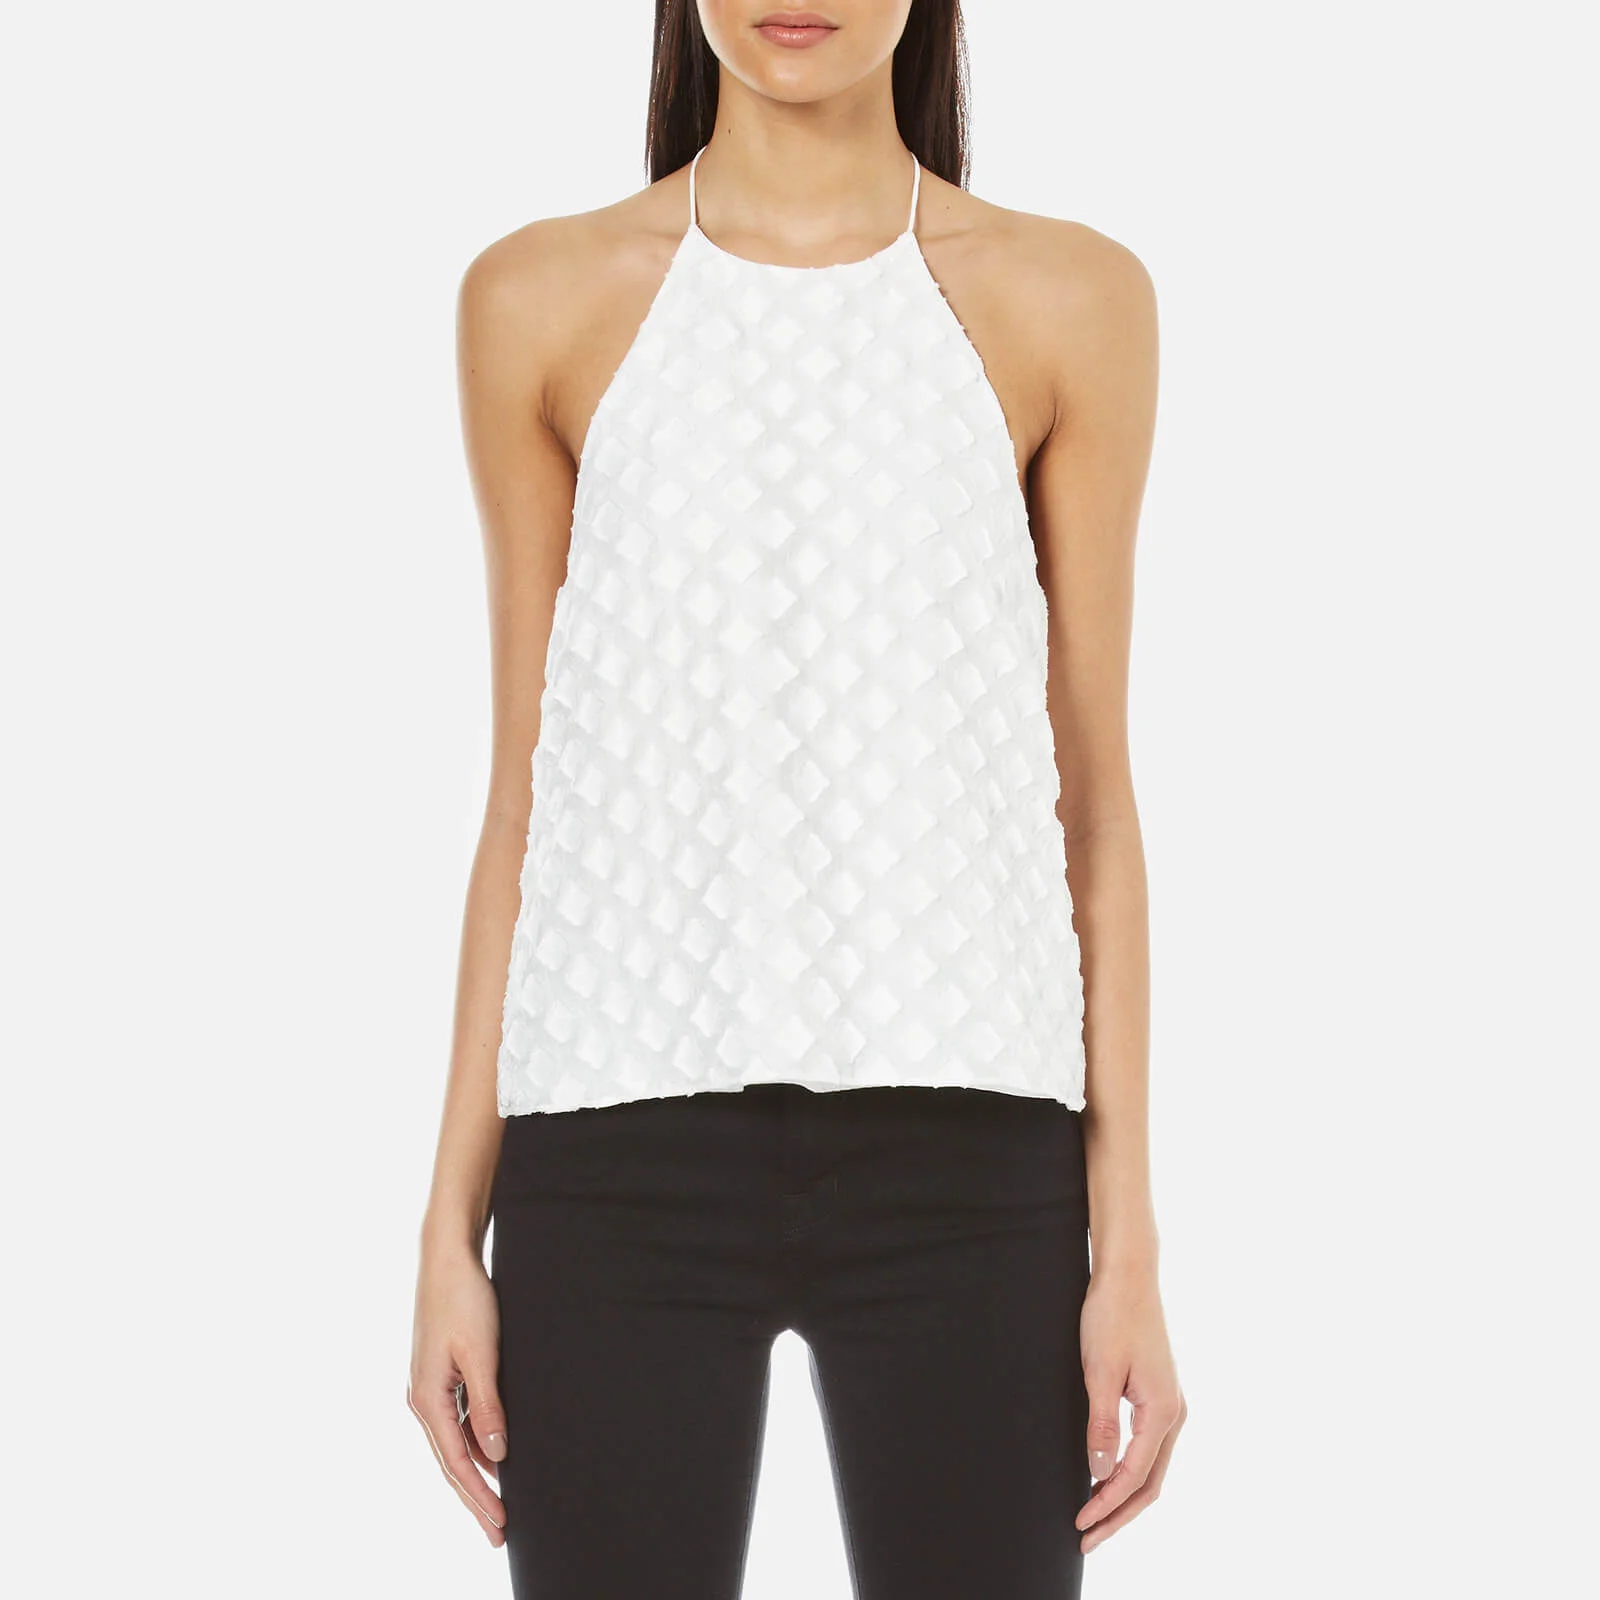 C/MEO COLLECTIVE Women's Faded Light Halter Top - Ivory Image 1